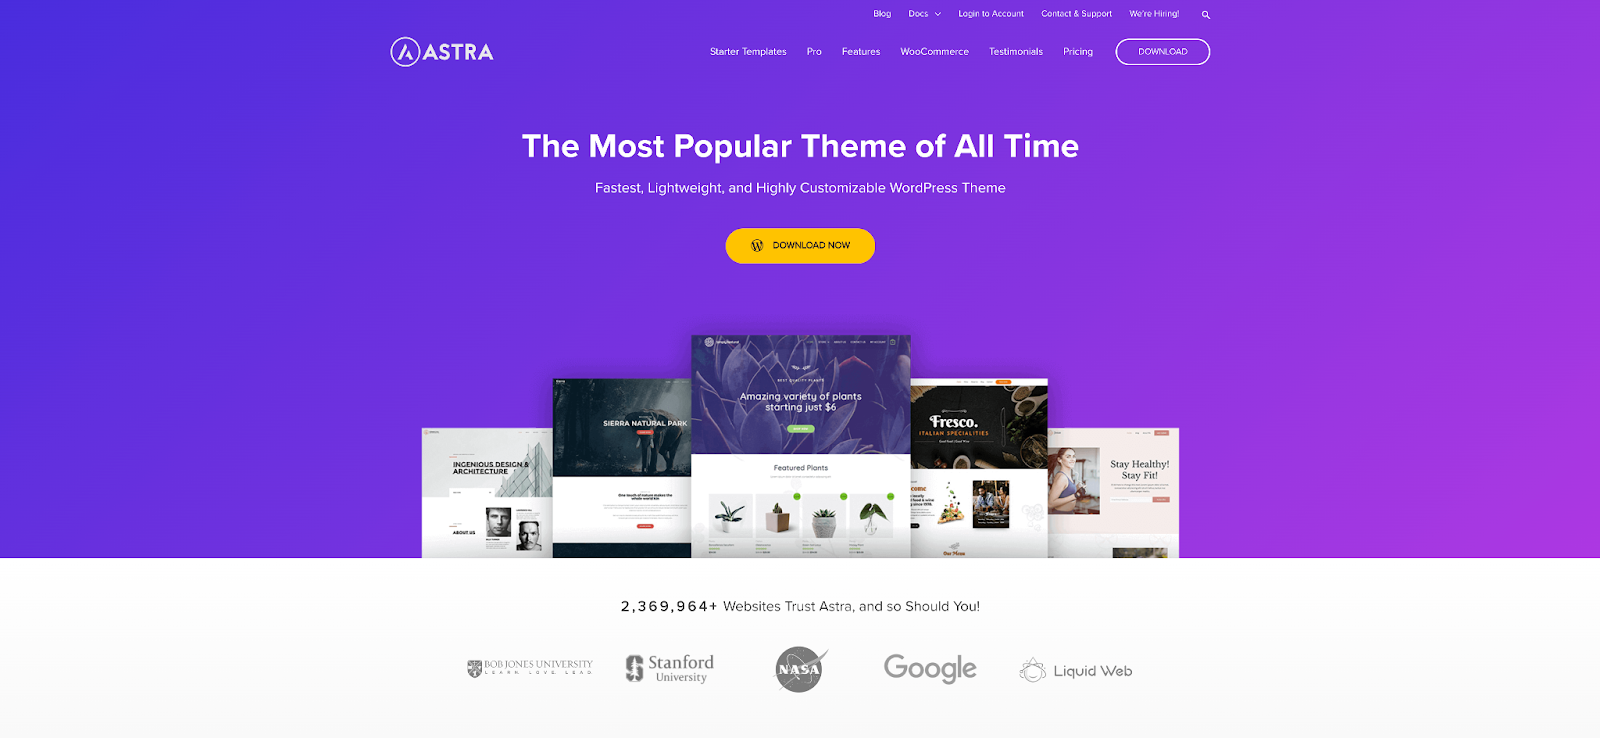 Astra is one of the most popular WordPress themes today and a good choice for your next blog